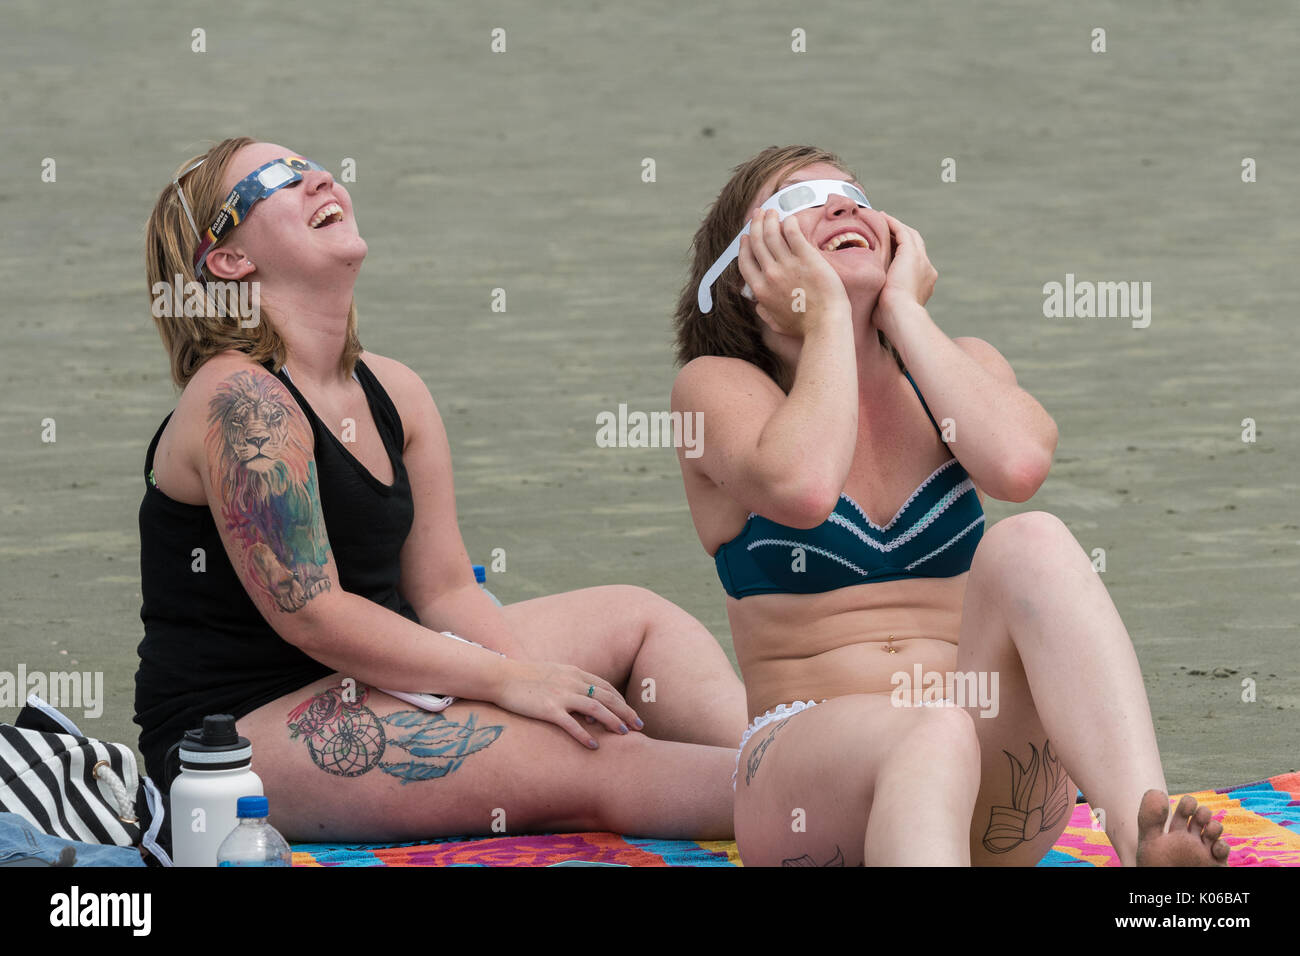 Charleston, Isle of Palms, USA. 21st Aug, 2017. Sunbathers react to the total solar eclipse as it passes over the beach outside Charleston August 21, 2017 in Isle of Palms, South Carolina. The solar eclipse after sweeping across the nation crosses the Charleston area before heading over the Atlantic Ocean. Credit: Planetpix/Alamy Live News Stock Photo